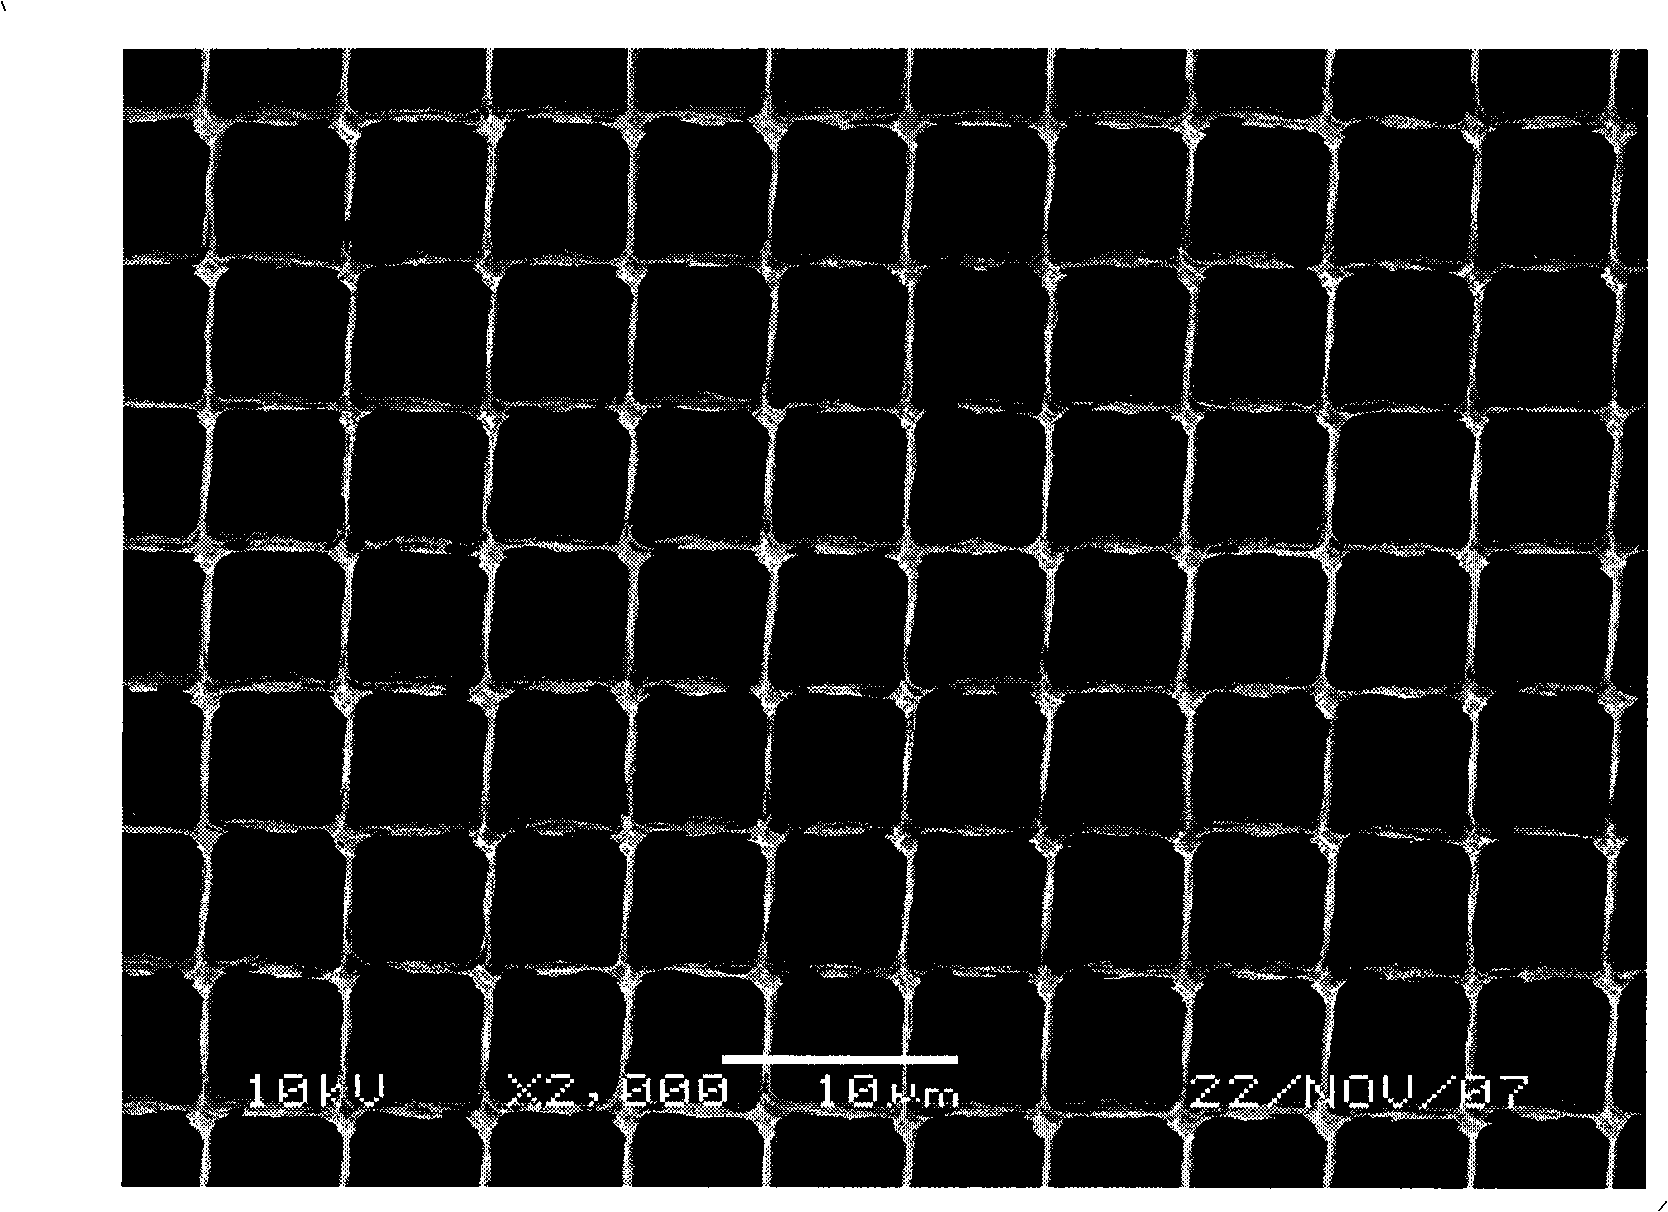 Method of electroless nickel plating on silicon substrate microchannel